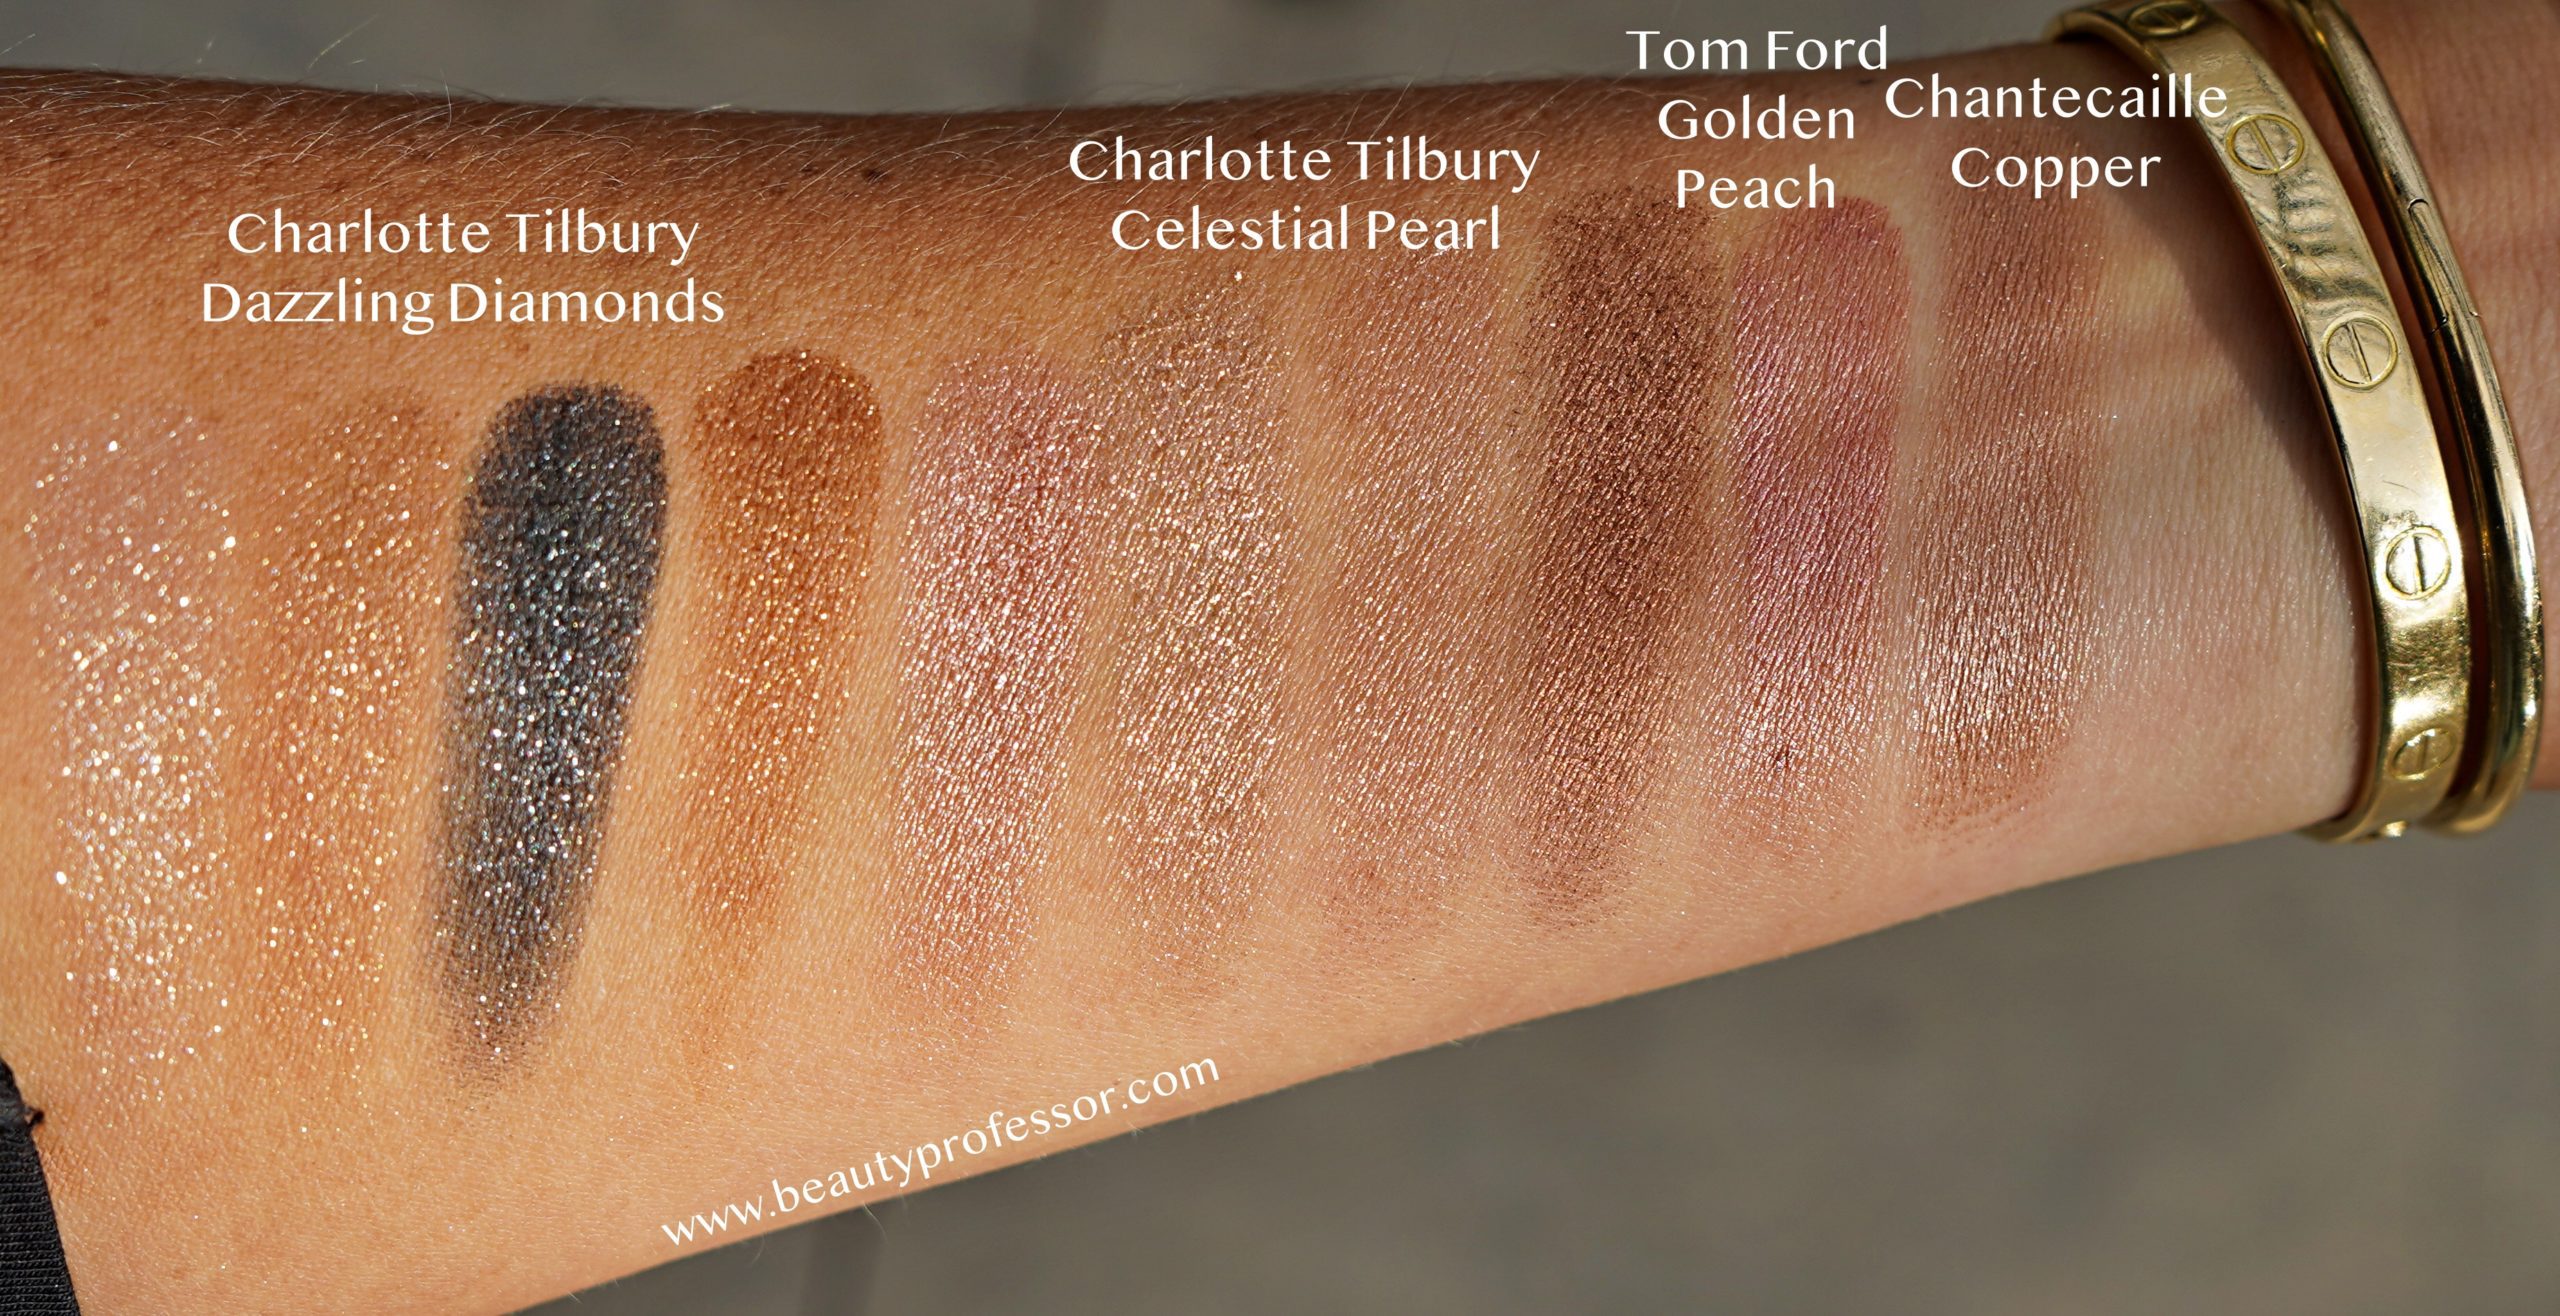 eye makeup swatches in an arm from whats in my bag 